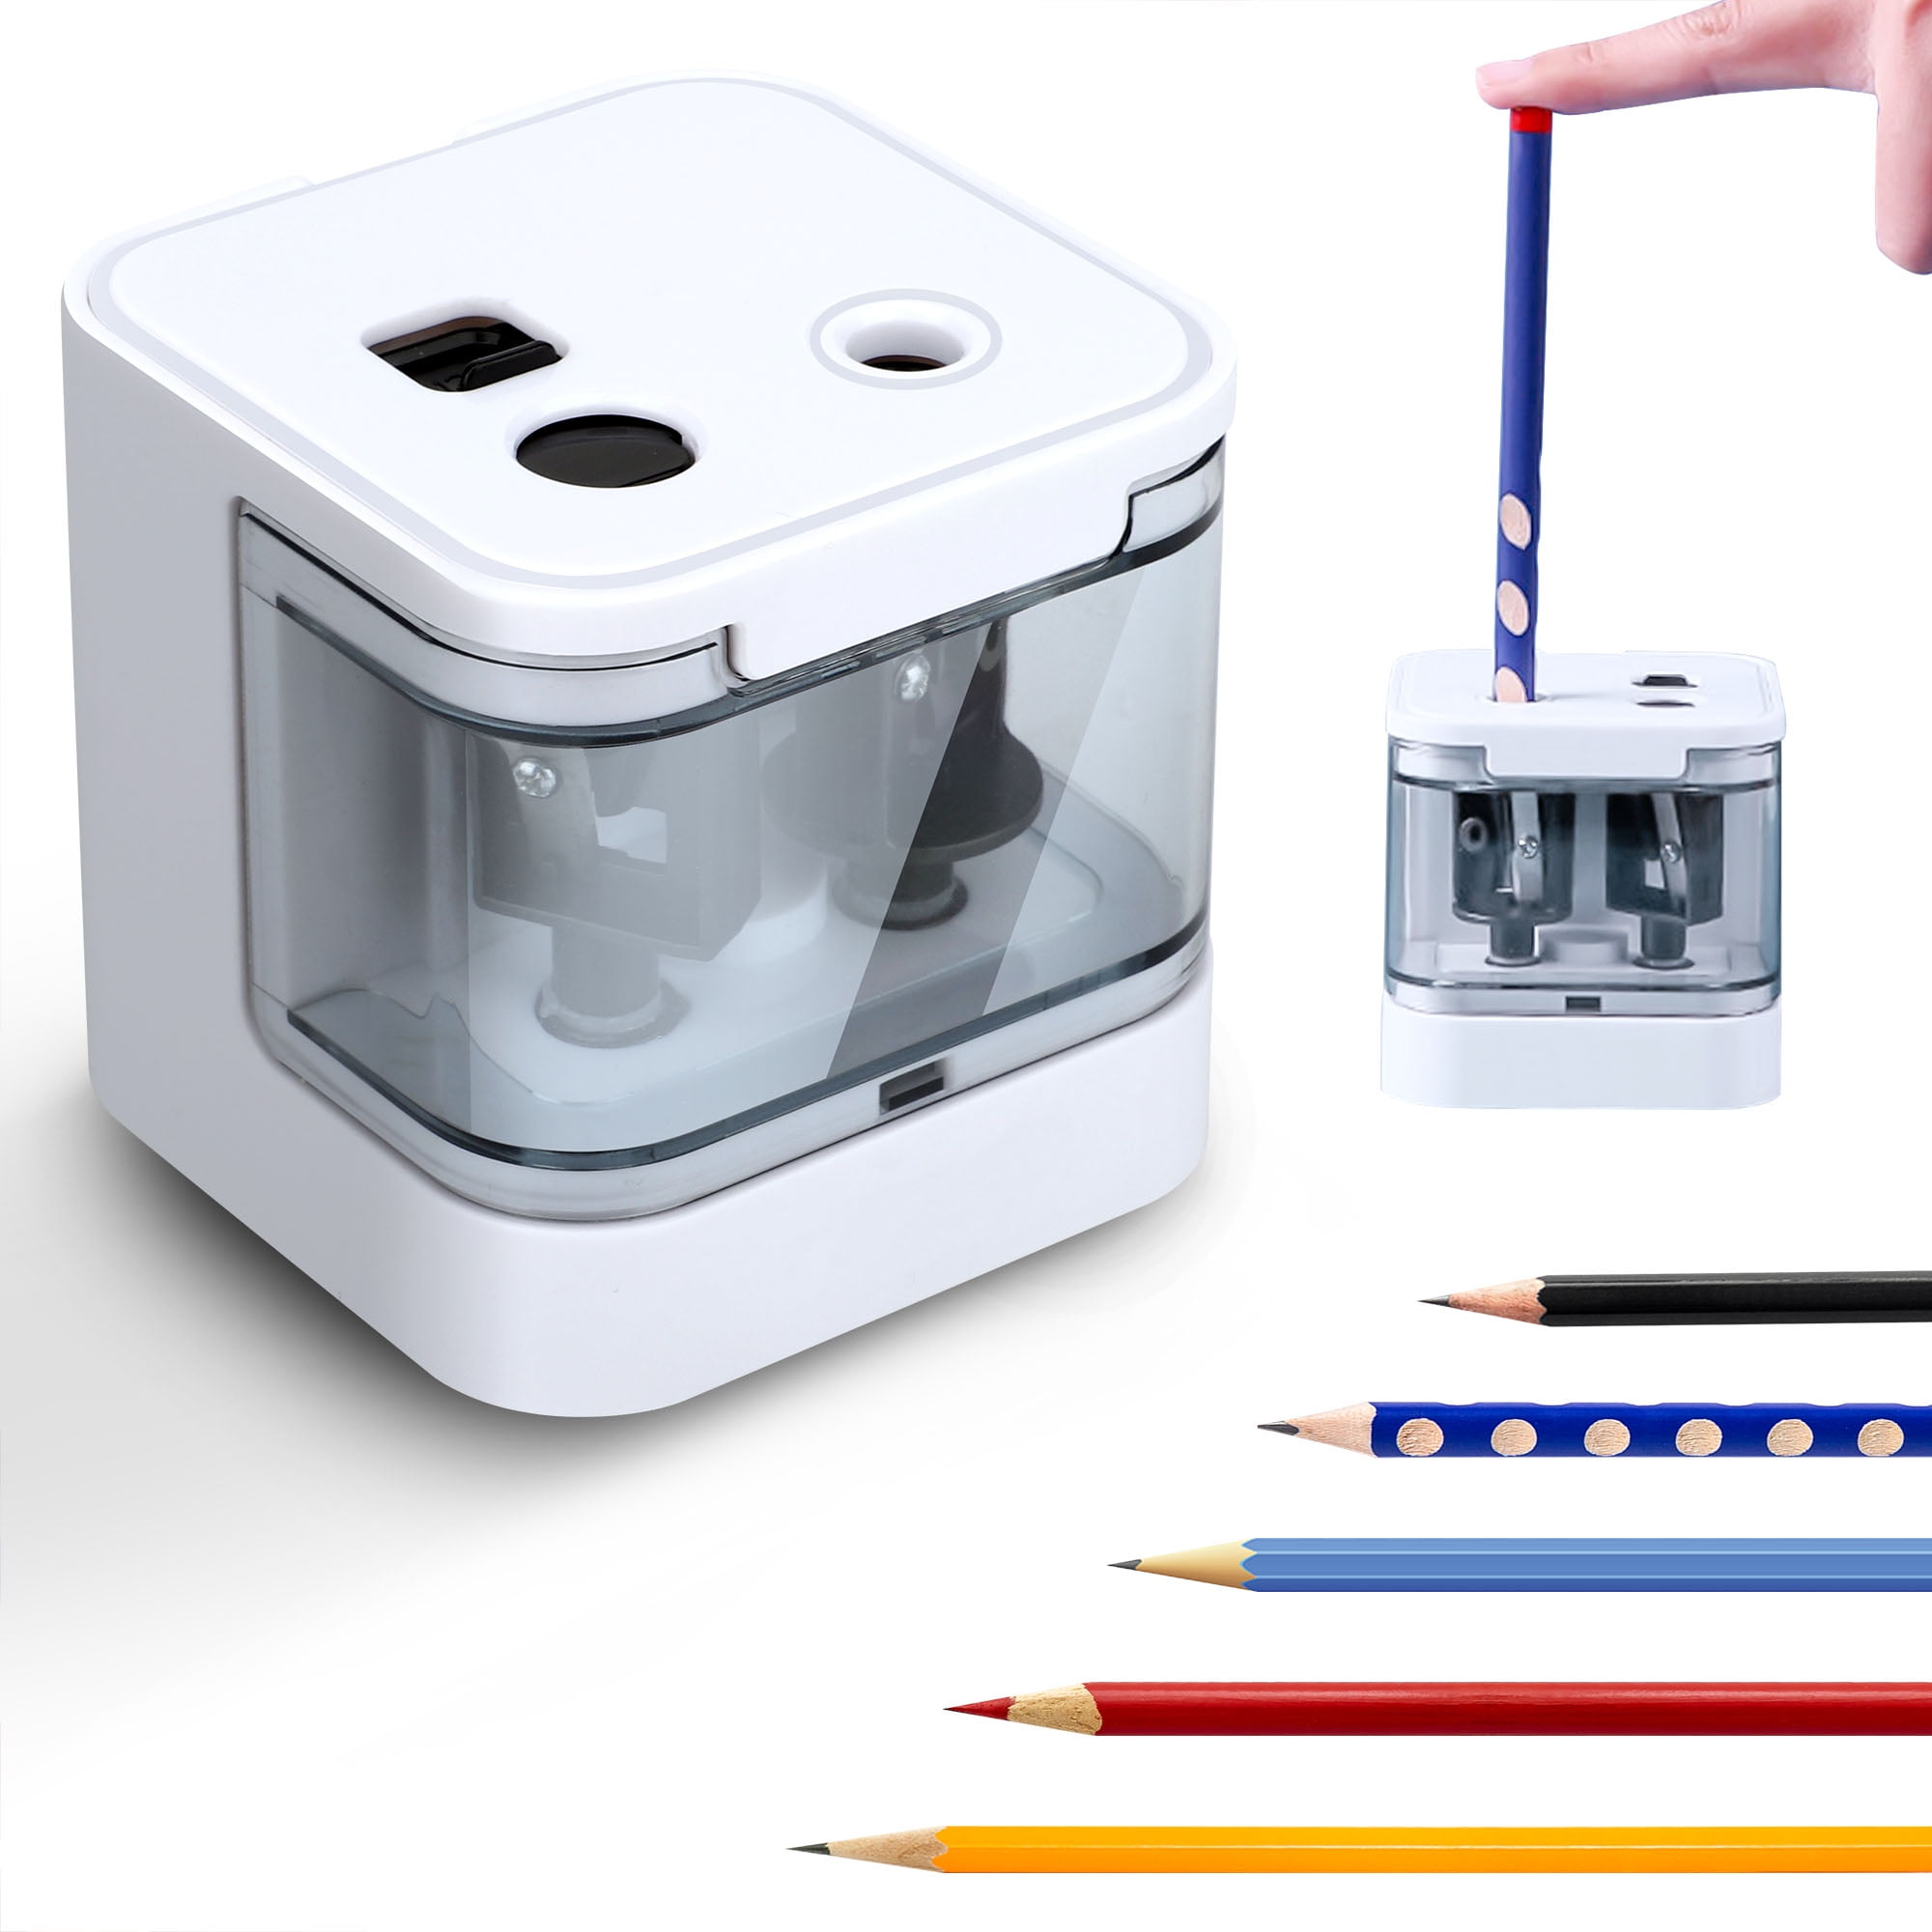 Electric Pencil Sharpener, TSV Double Hole Automatic Sharpener for  No.2/Colored Pencils, USB & Battery Operated - White 